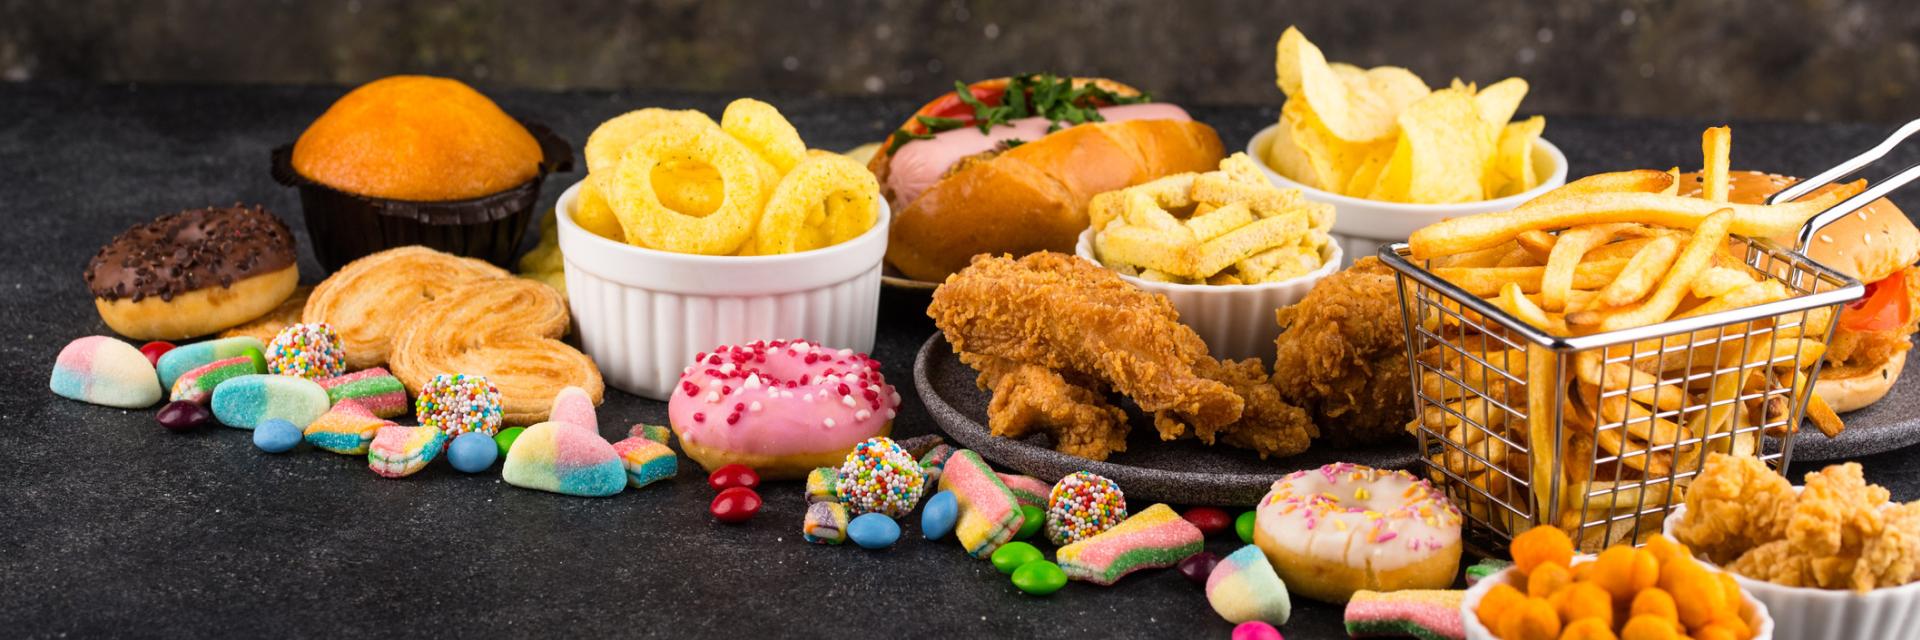 An assortment of ultra-processed foods including donuts/pasties, candy, and fried foods such as potato chip, onion rings, fries, and breaded chicken.